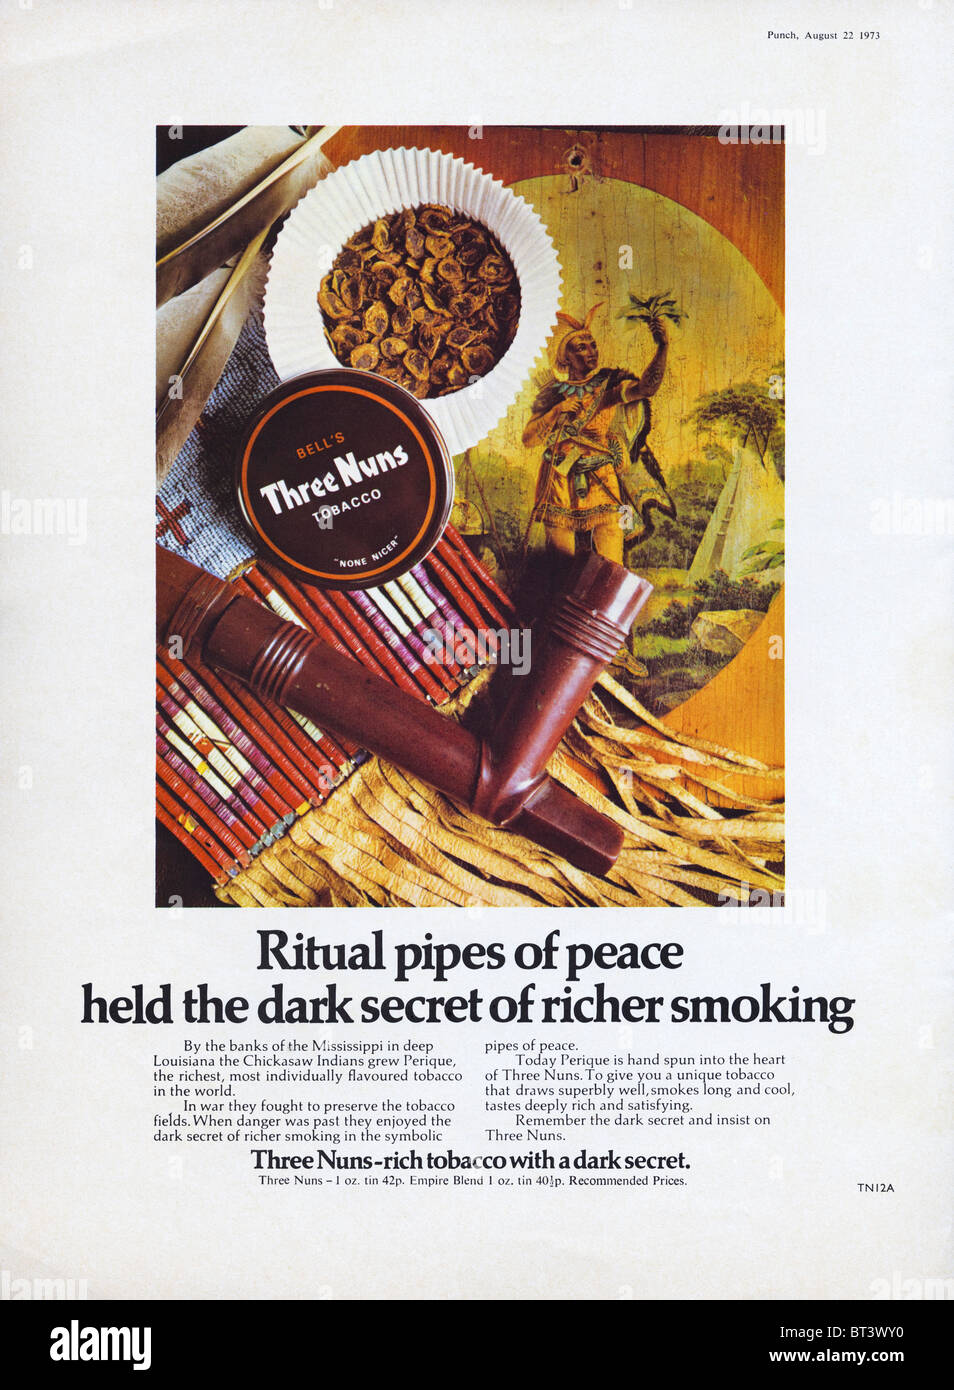 Classic advert for Three Nuns pipe tobacco in magazaine dated 22-28 August 1973 Stock Photo